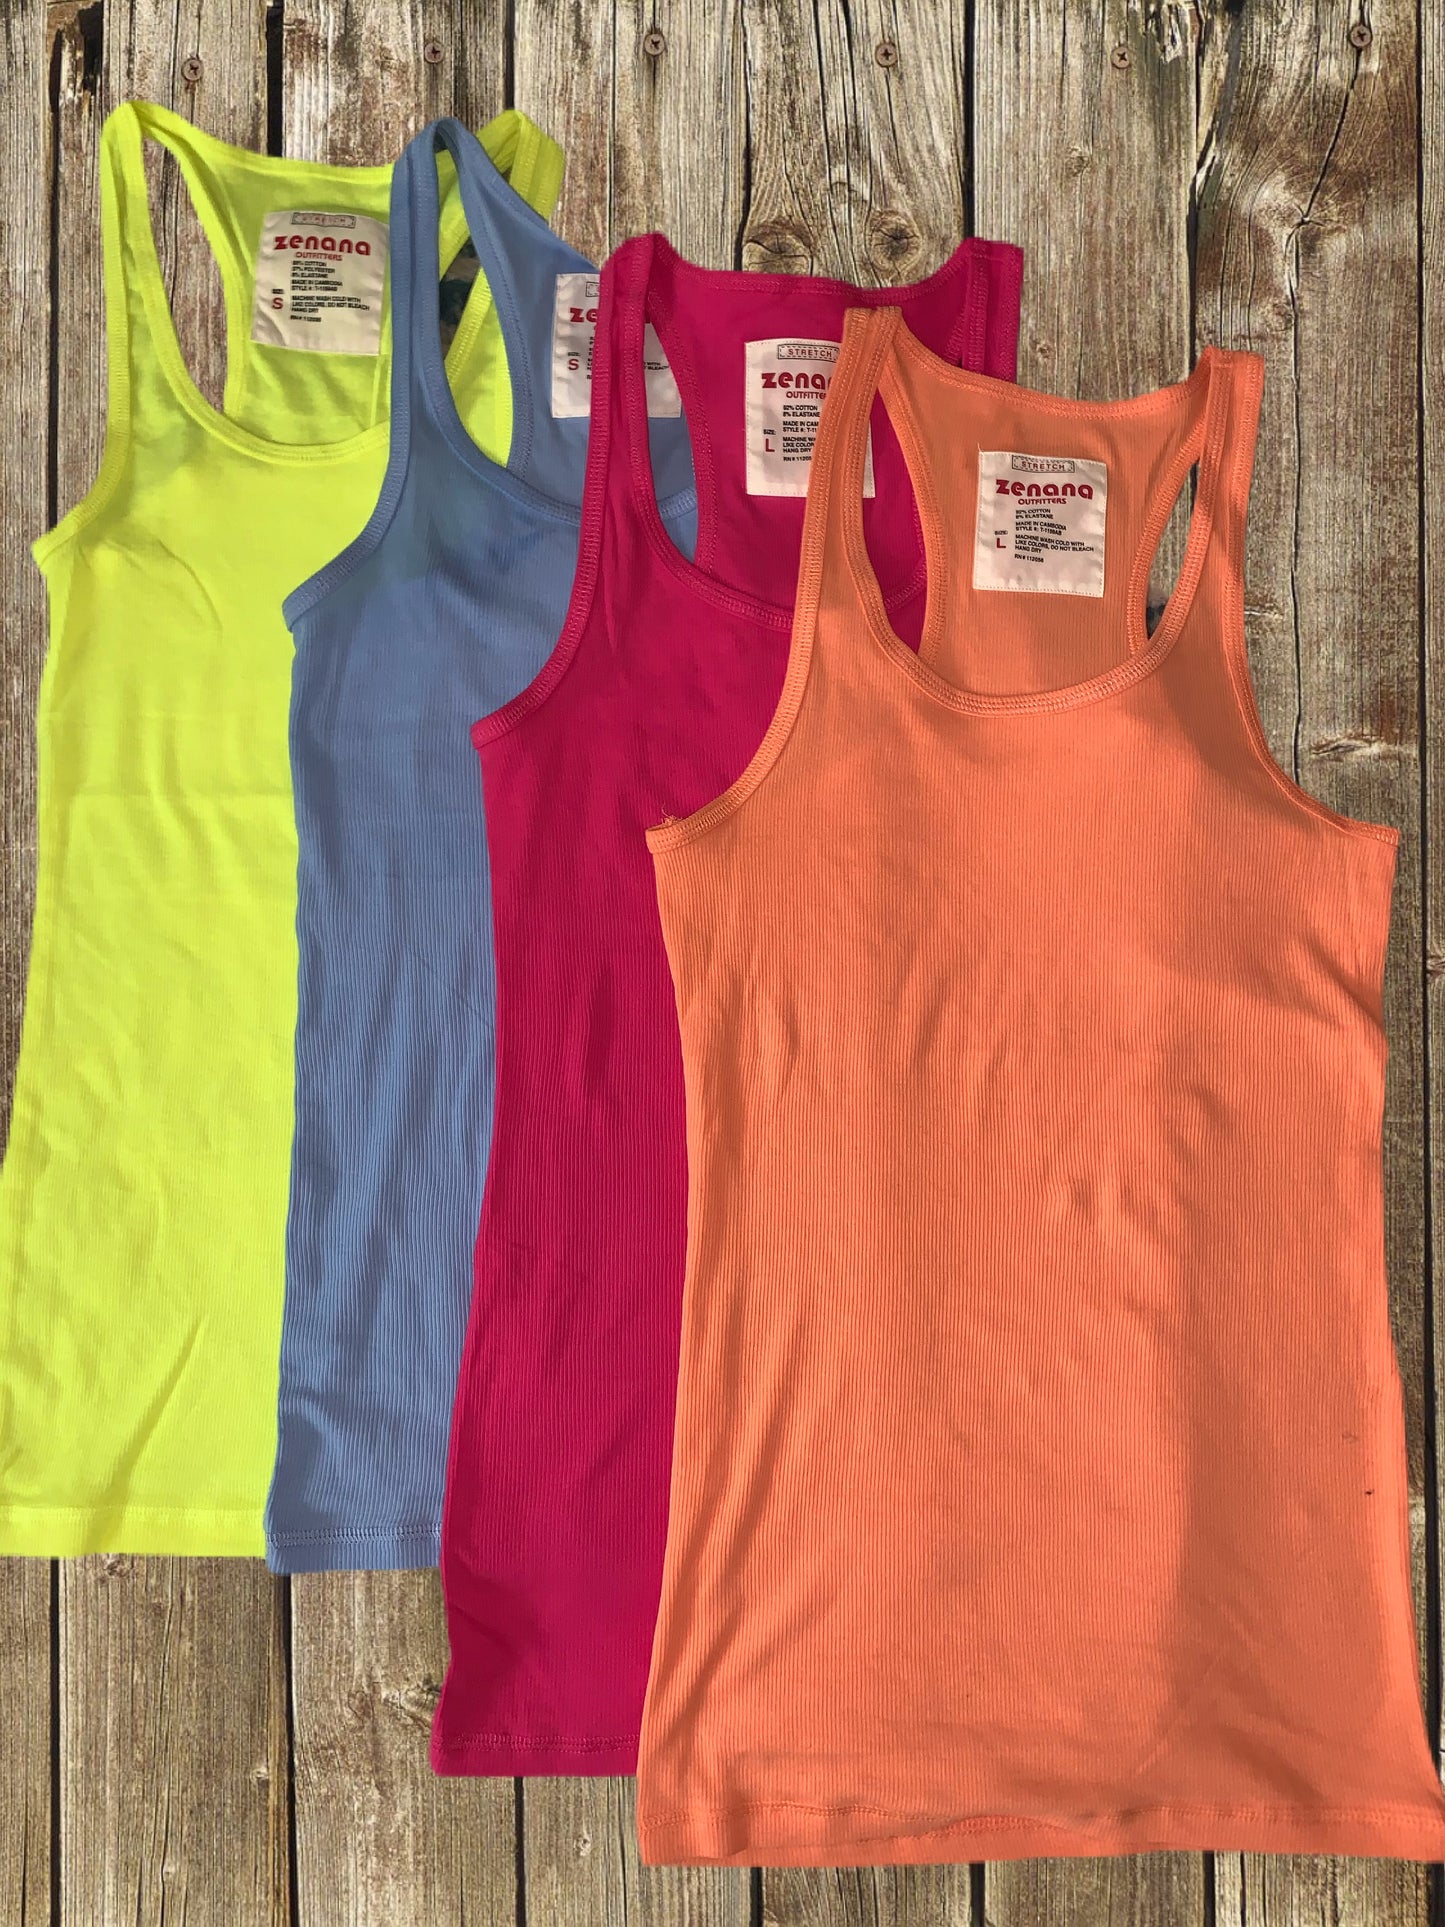 Mix and Match Ribbed Tanks